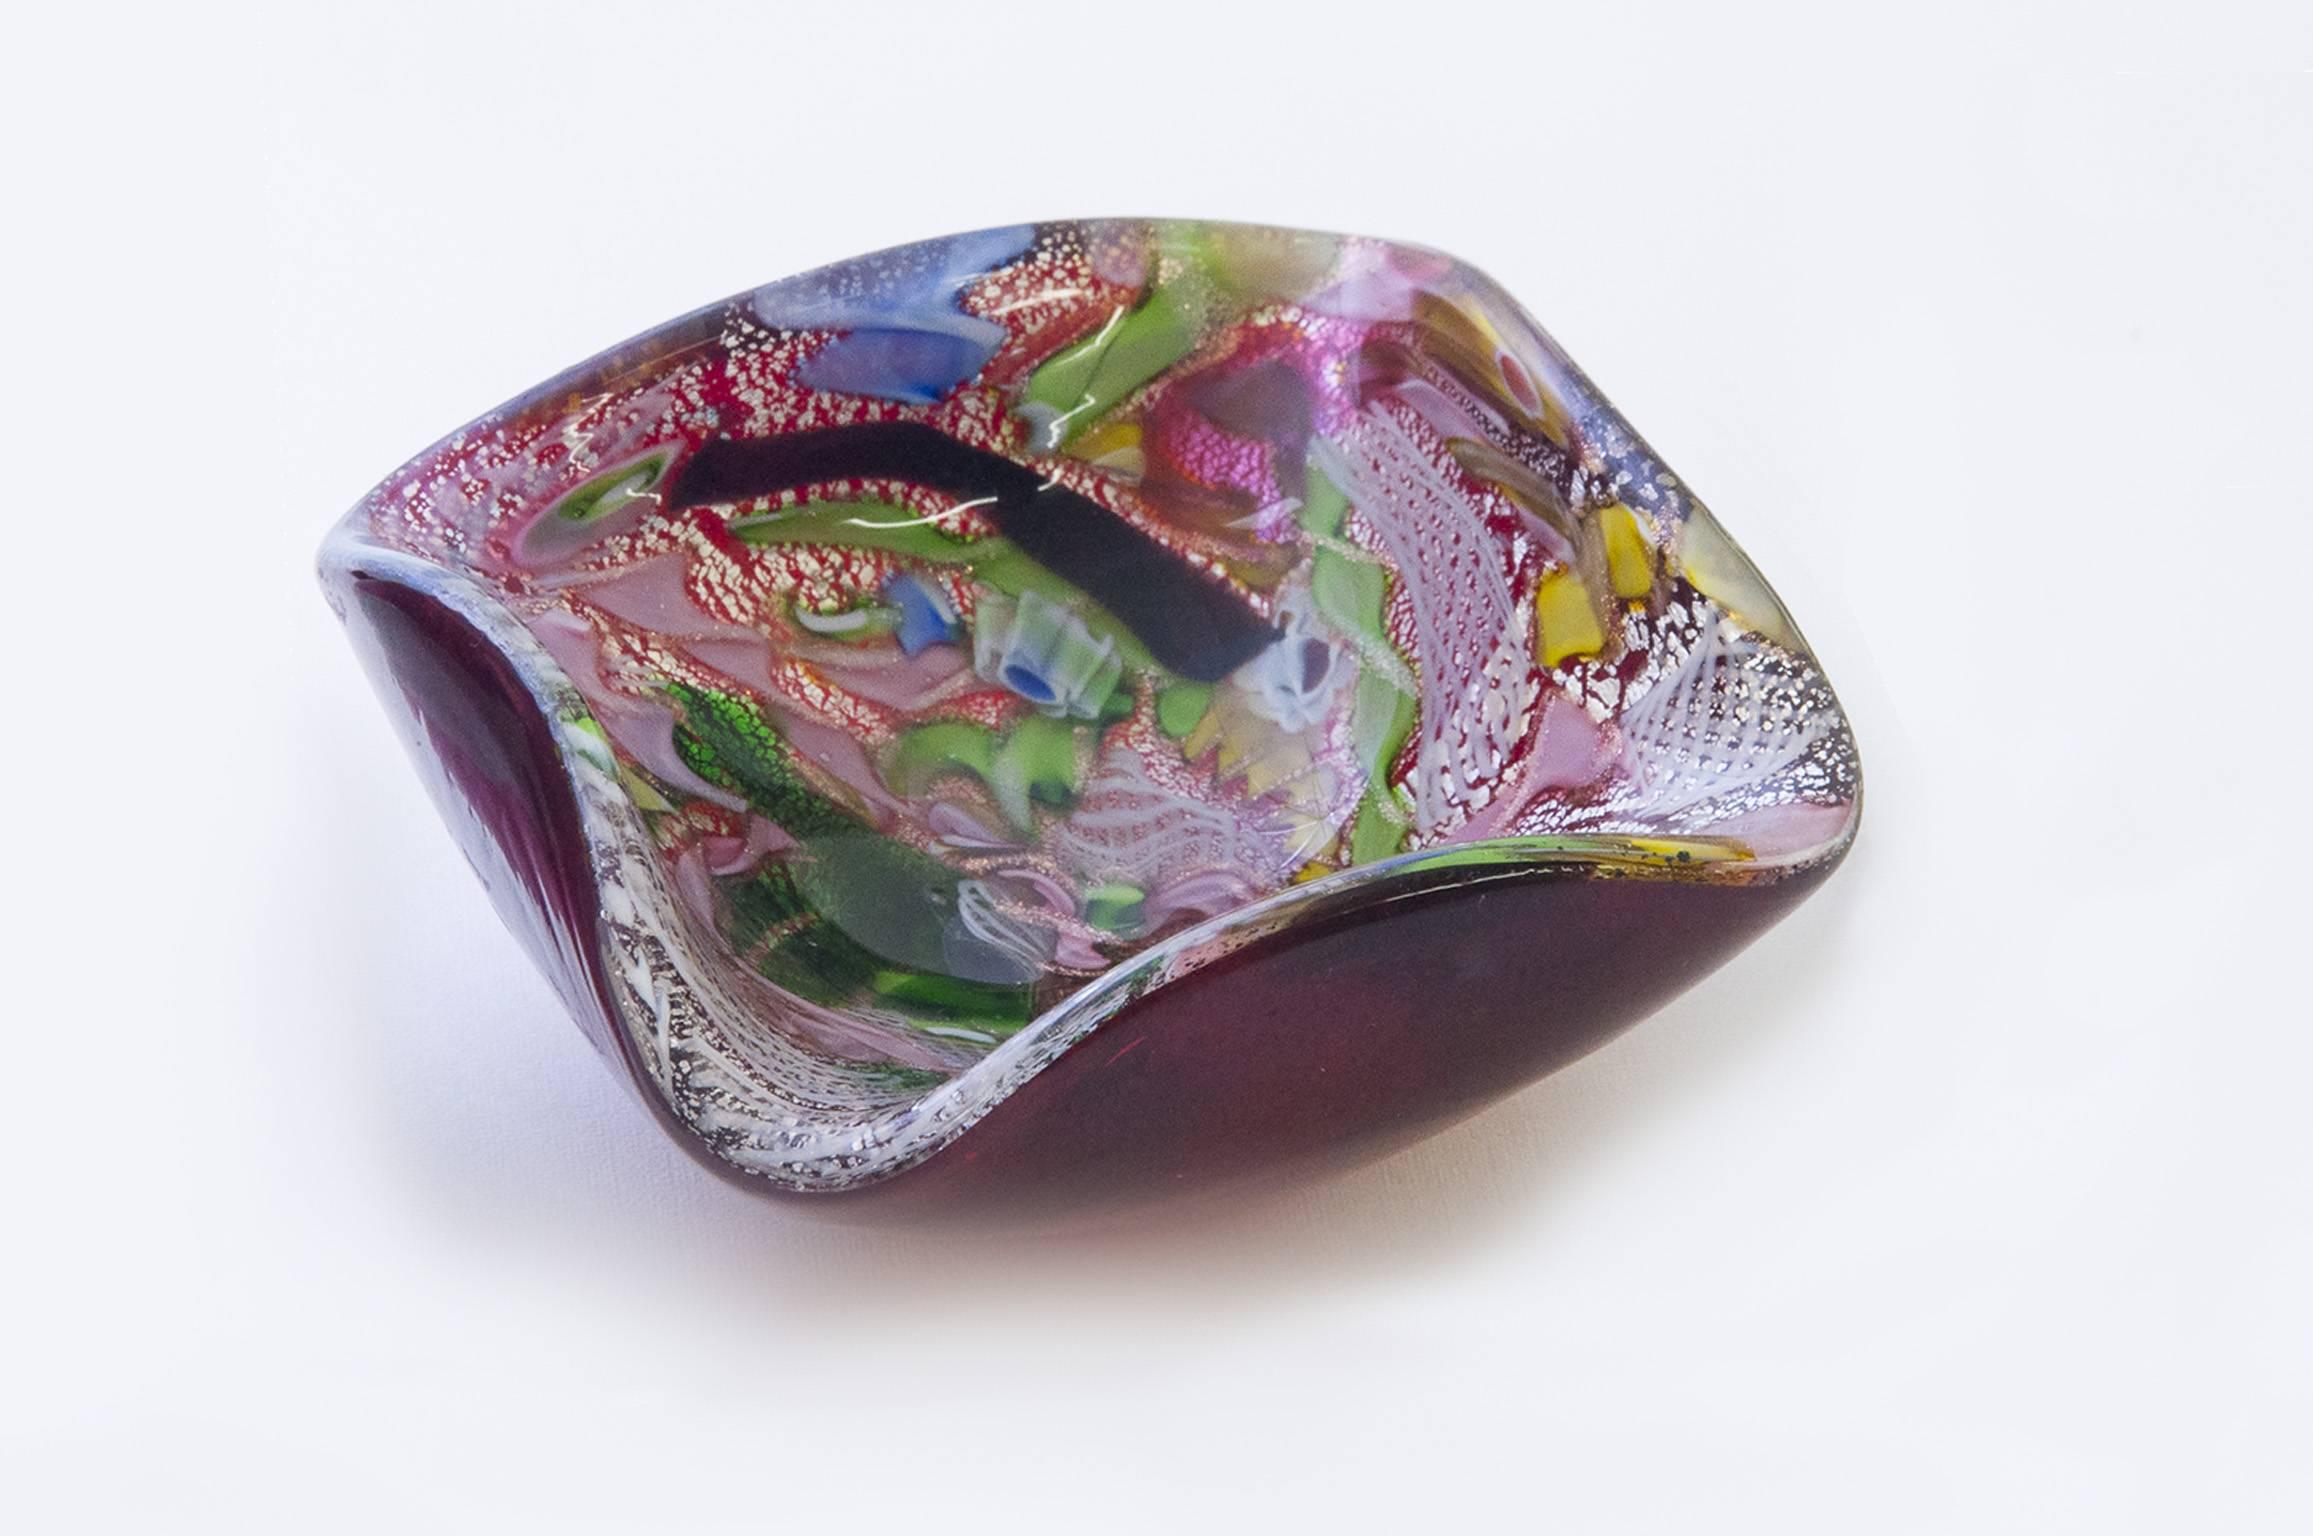 Multi-coloured glass designed by Dino Martens for Aureliano Toso.
handblown Glass Ashtray, i.e. looks different from every side, you will watch it.